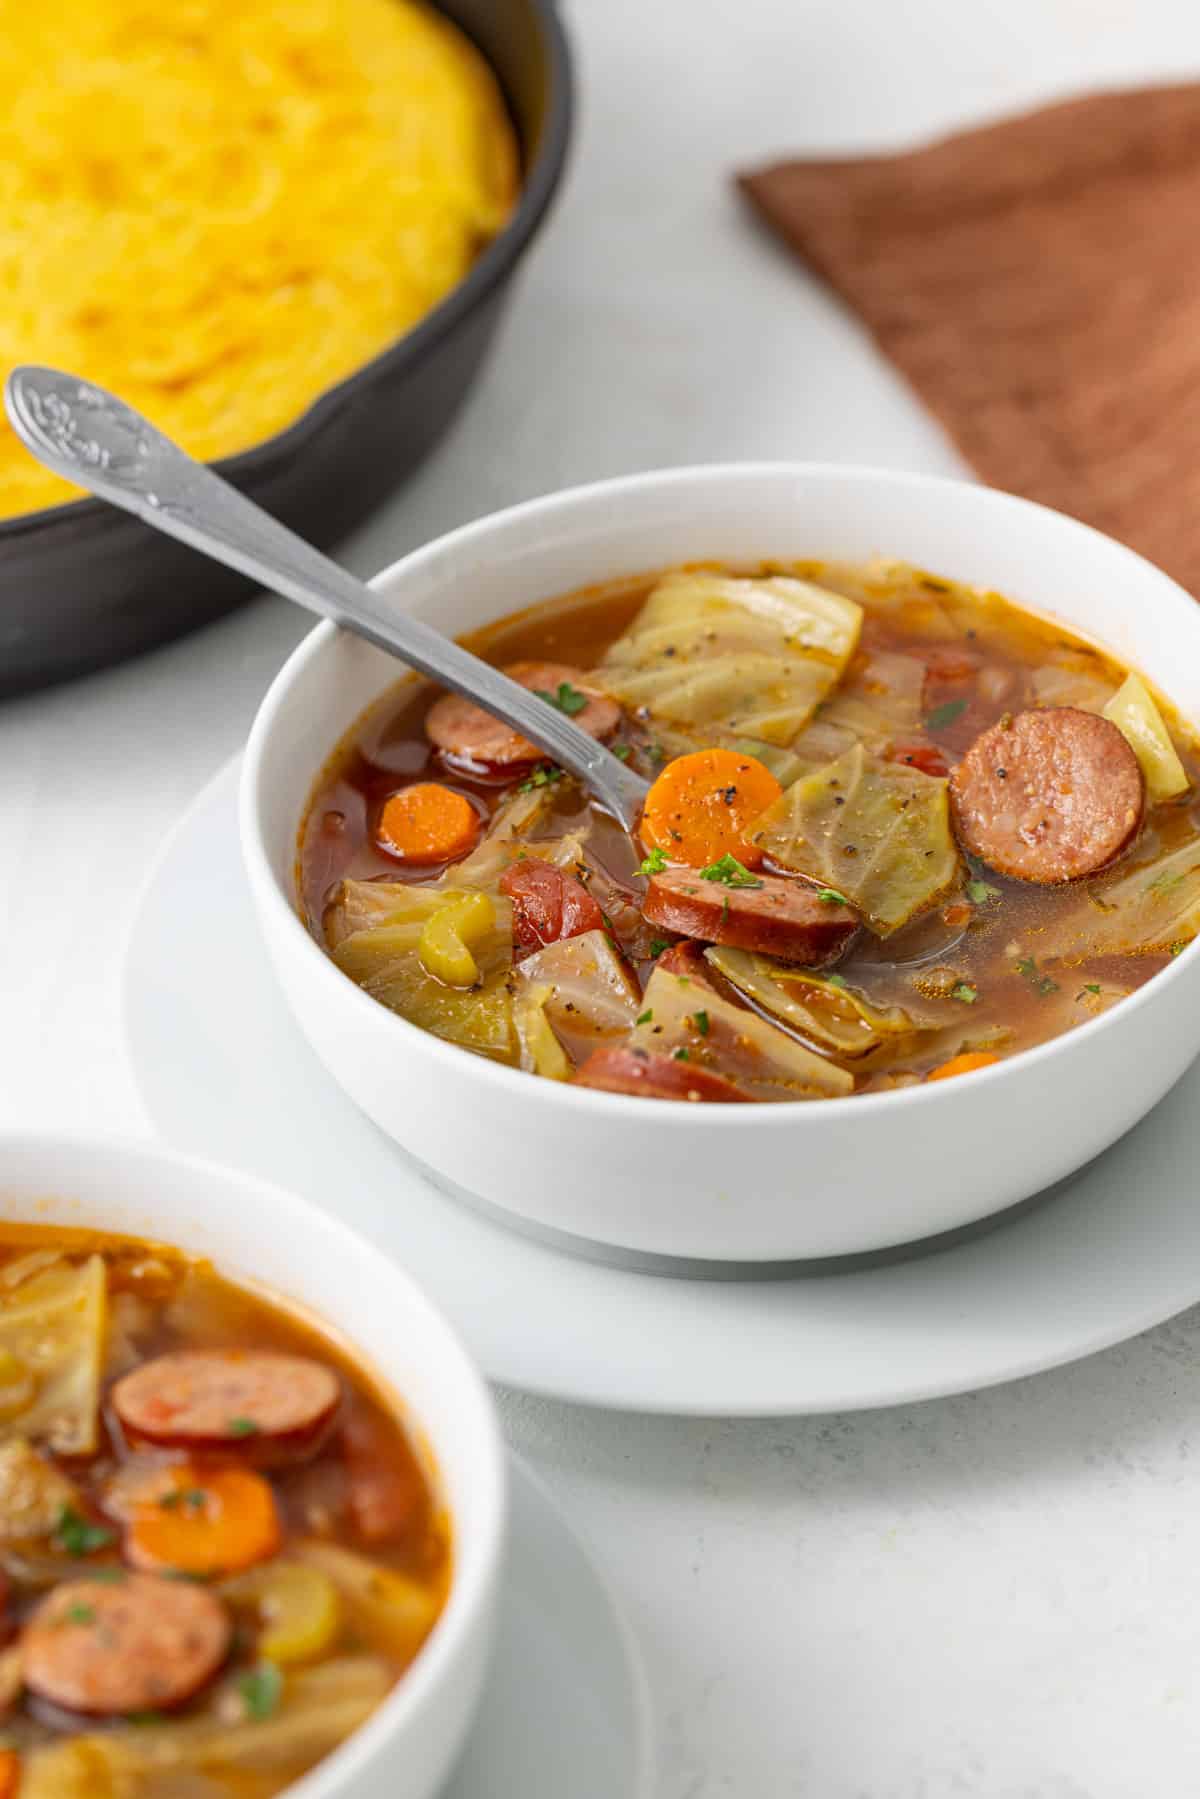 Front view of a spoon in a bowl of cabbage and sausage soup.